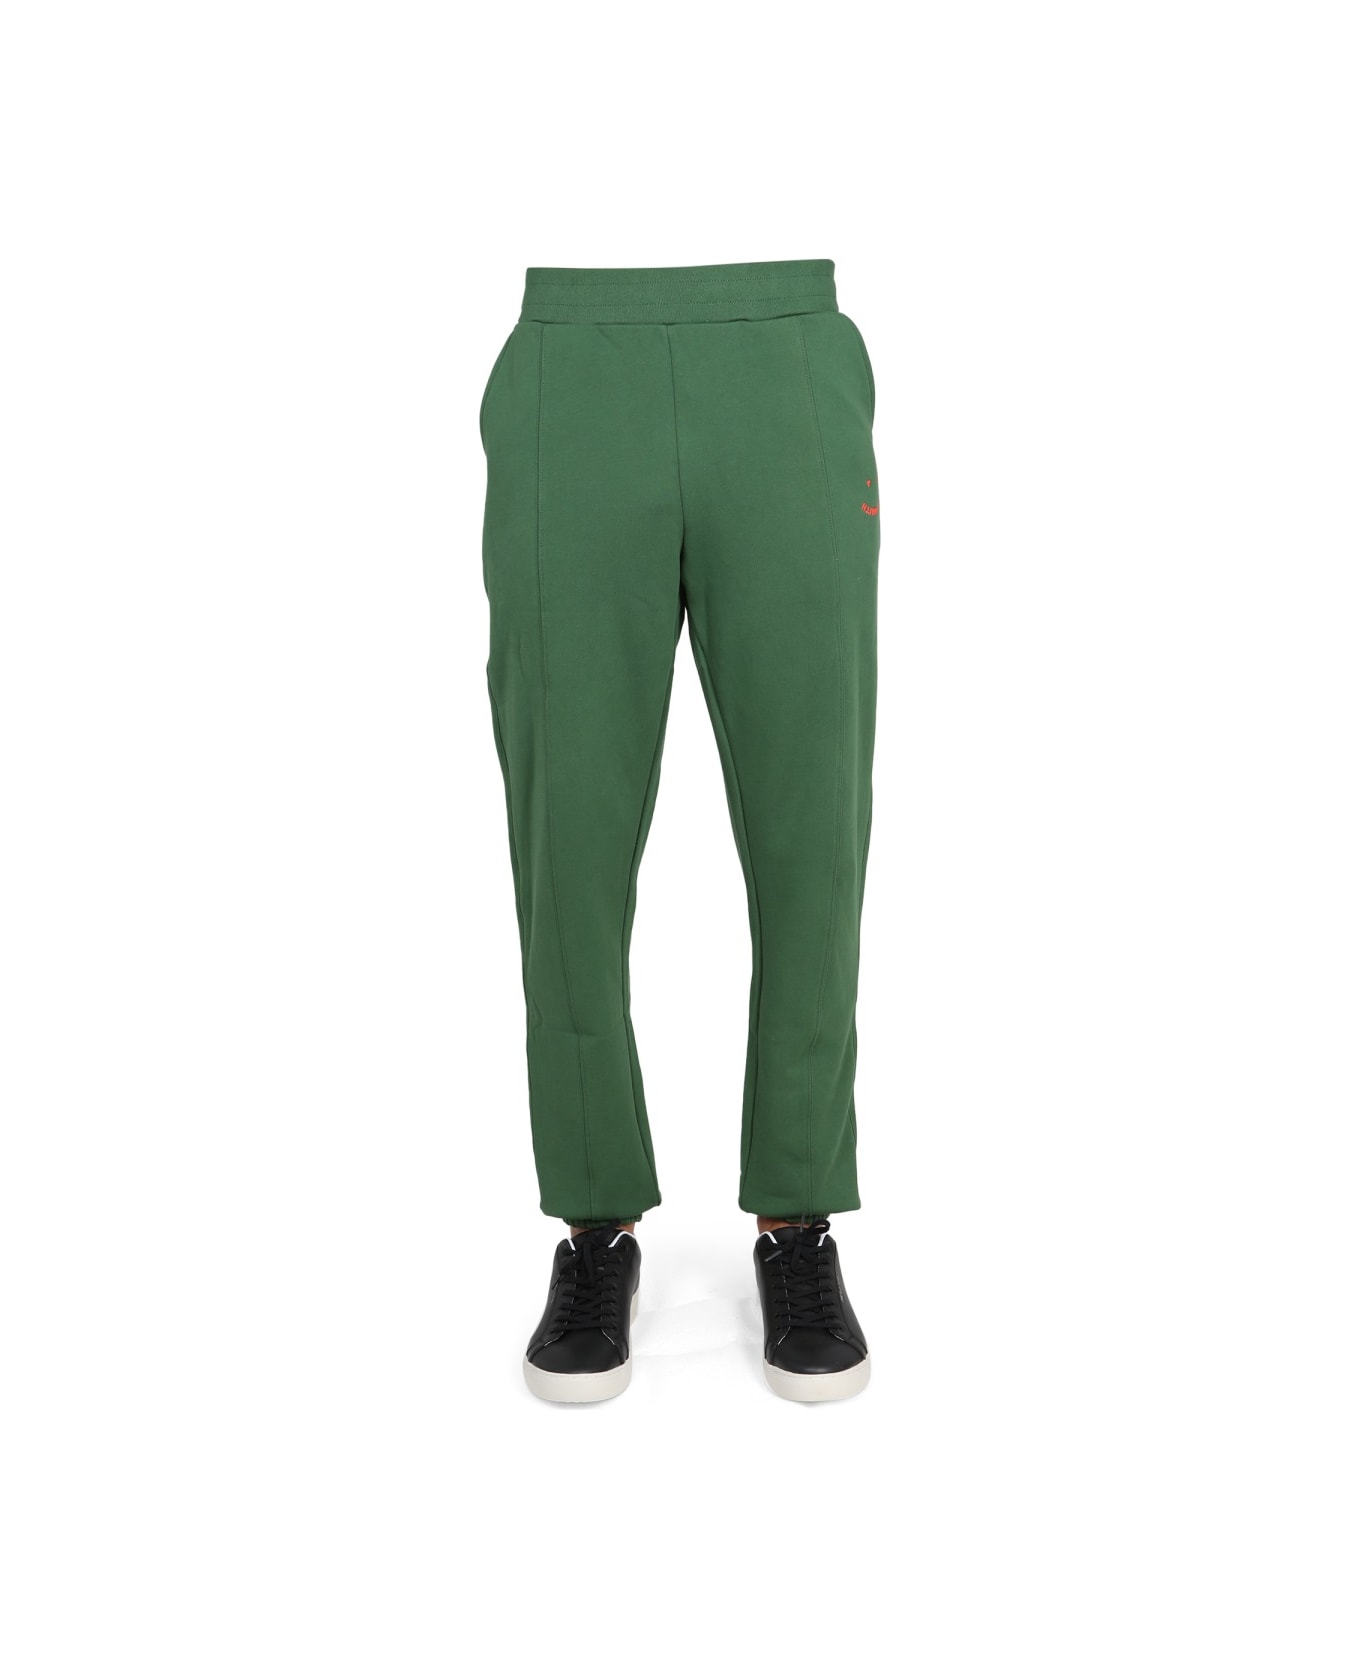 PS by Paul Smith Jogging Pants "happy" - GREEN